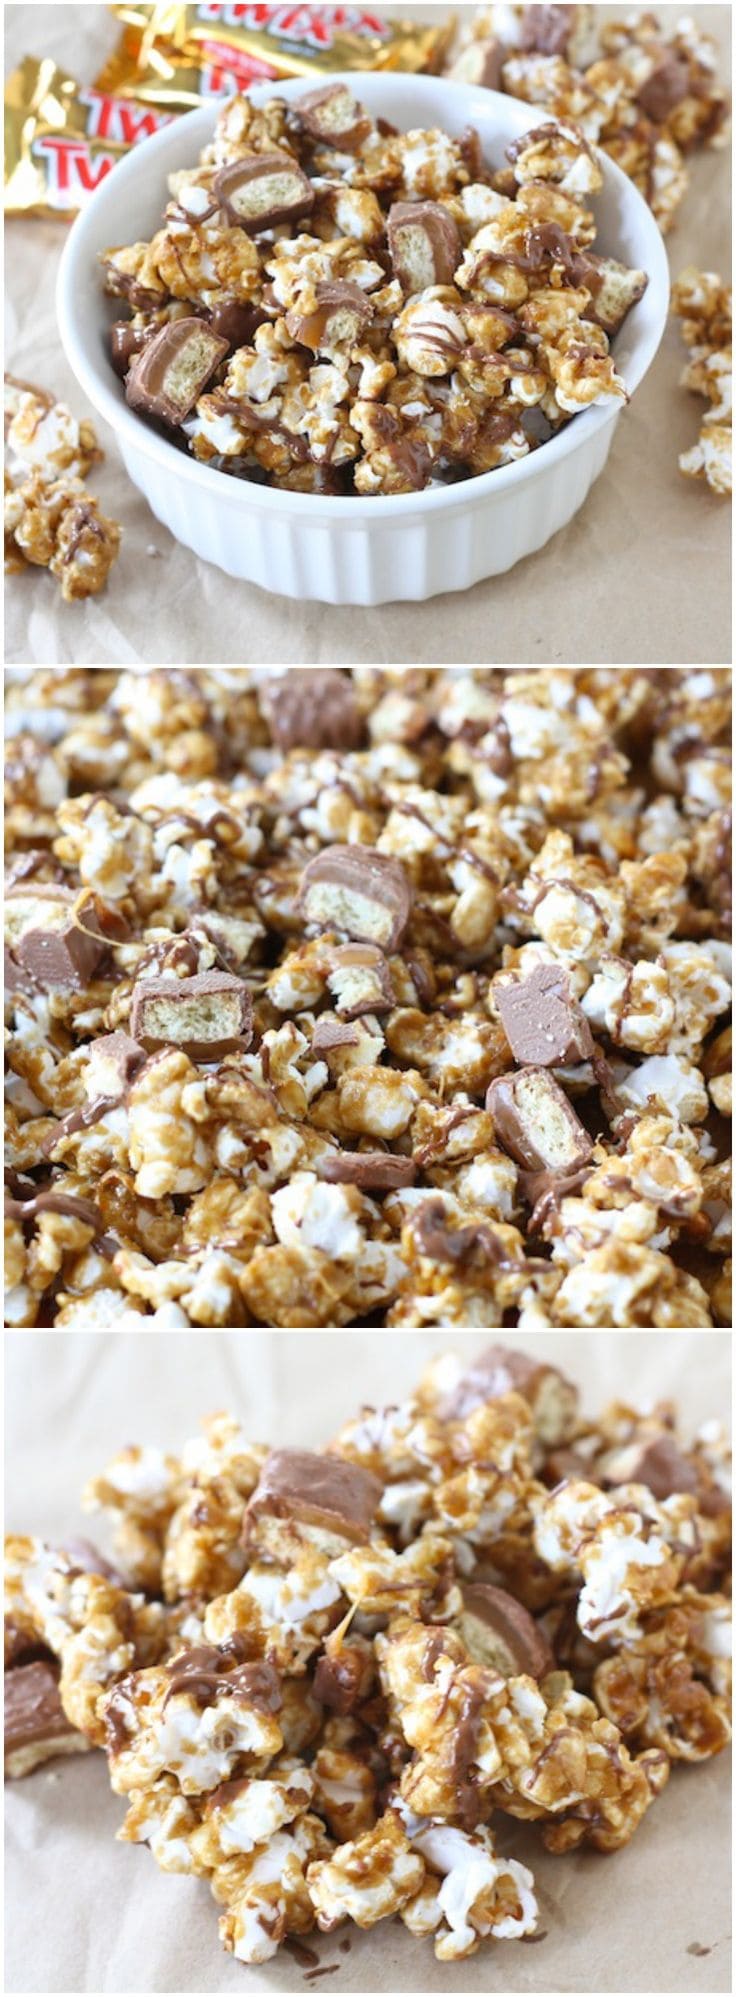 Twix Caramel Popcorn Recipe on twopeasandtheirpod.com A great sweet snack for parties, movie night, game day, or any day!